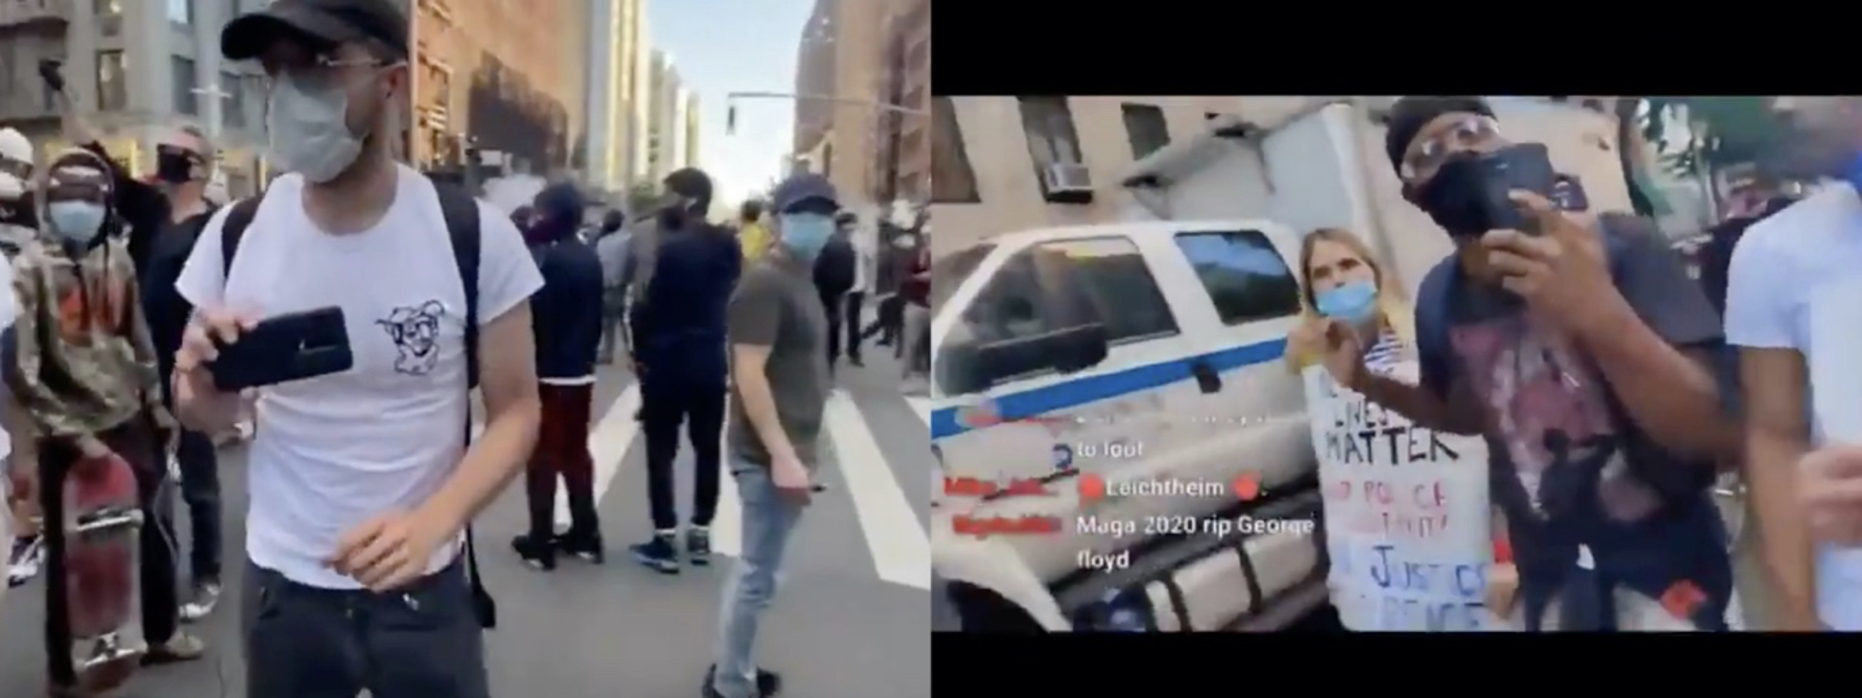 Peaceful protesters stop livestreamer from instigating violence